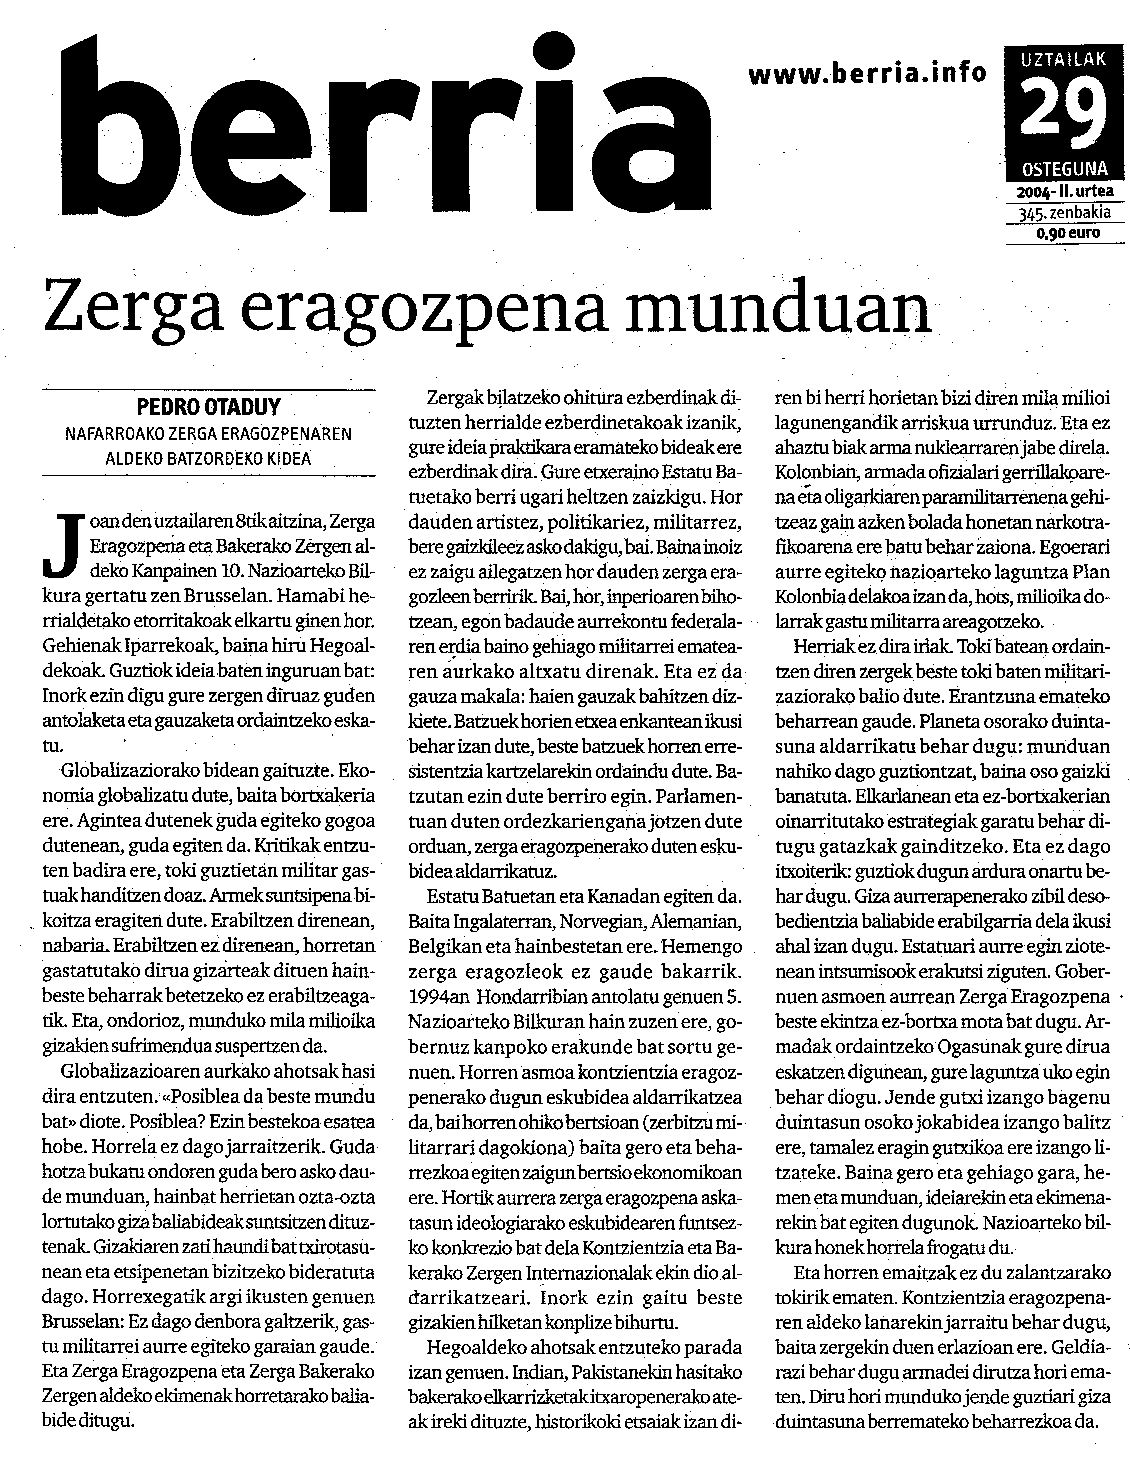 image of the article